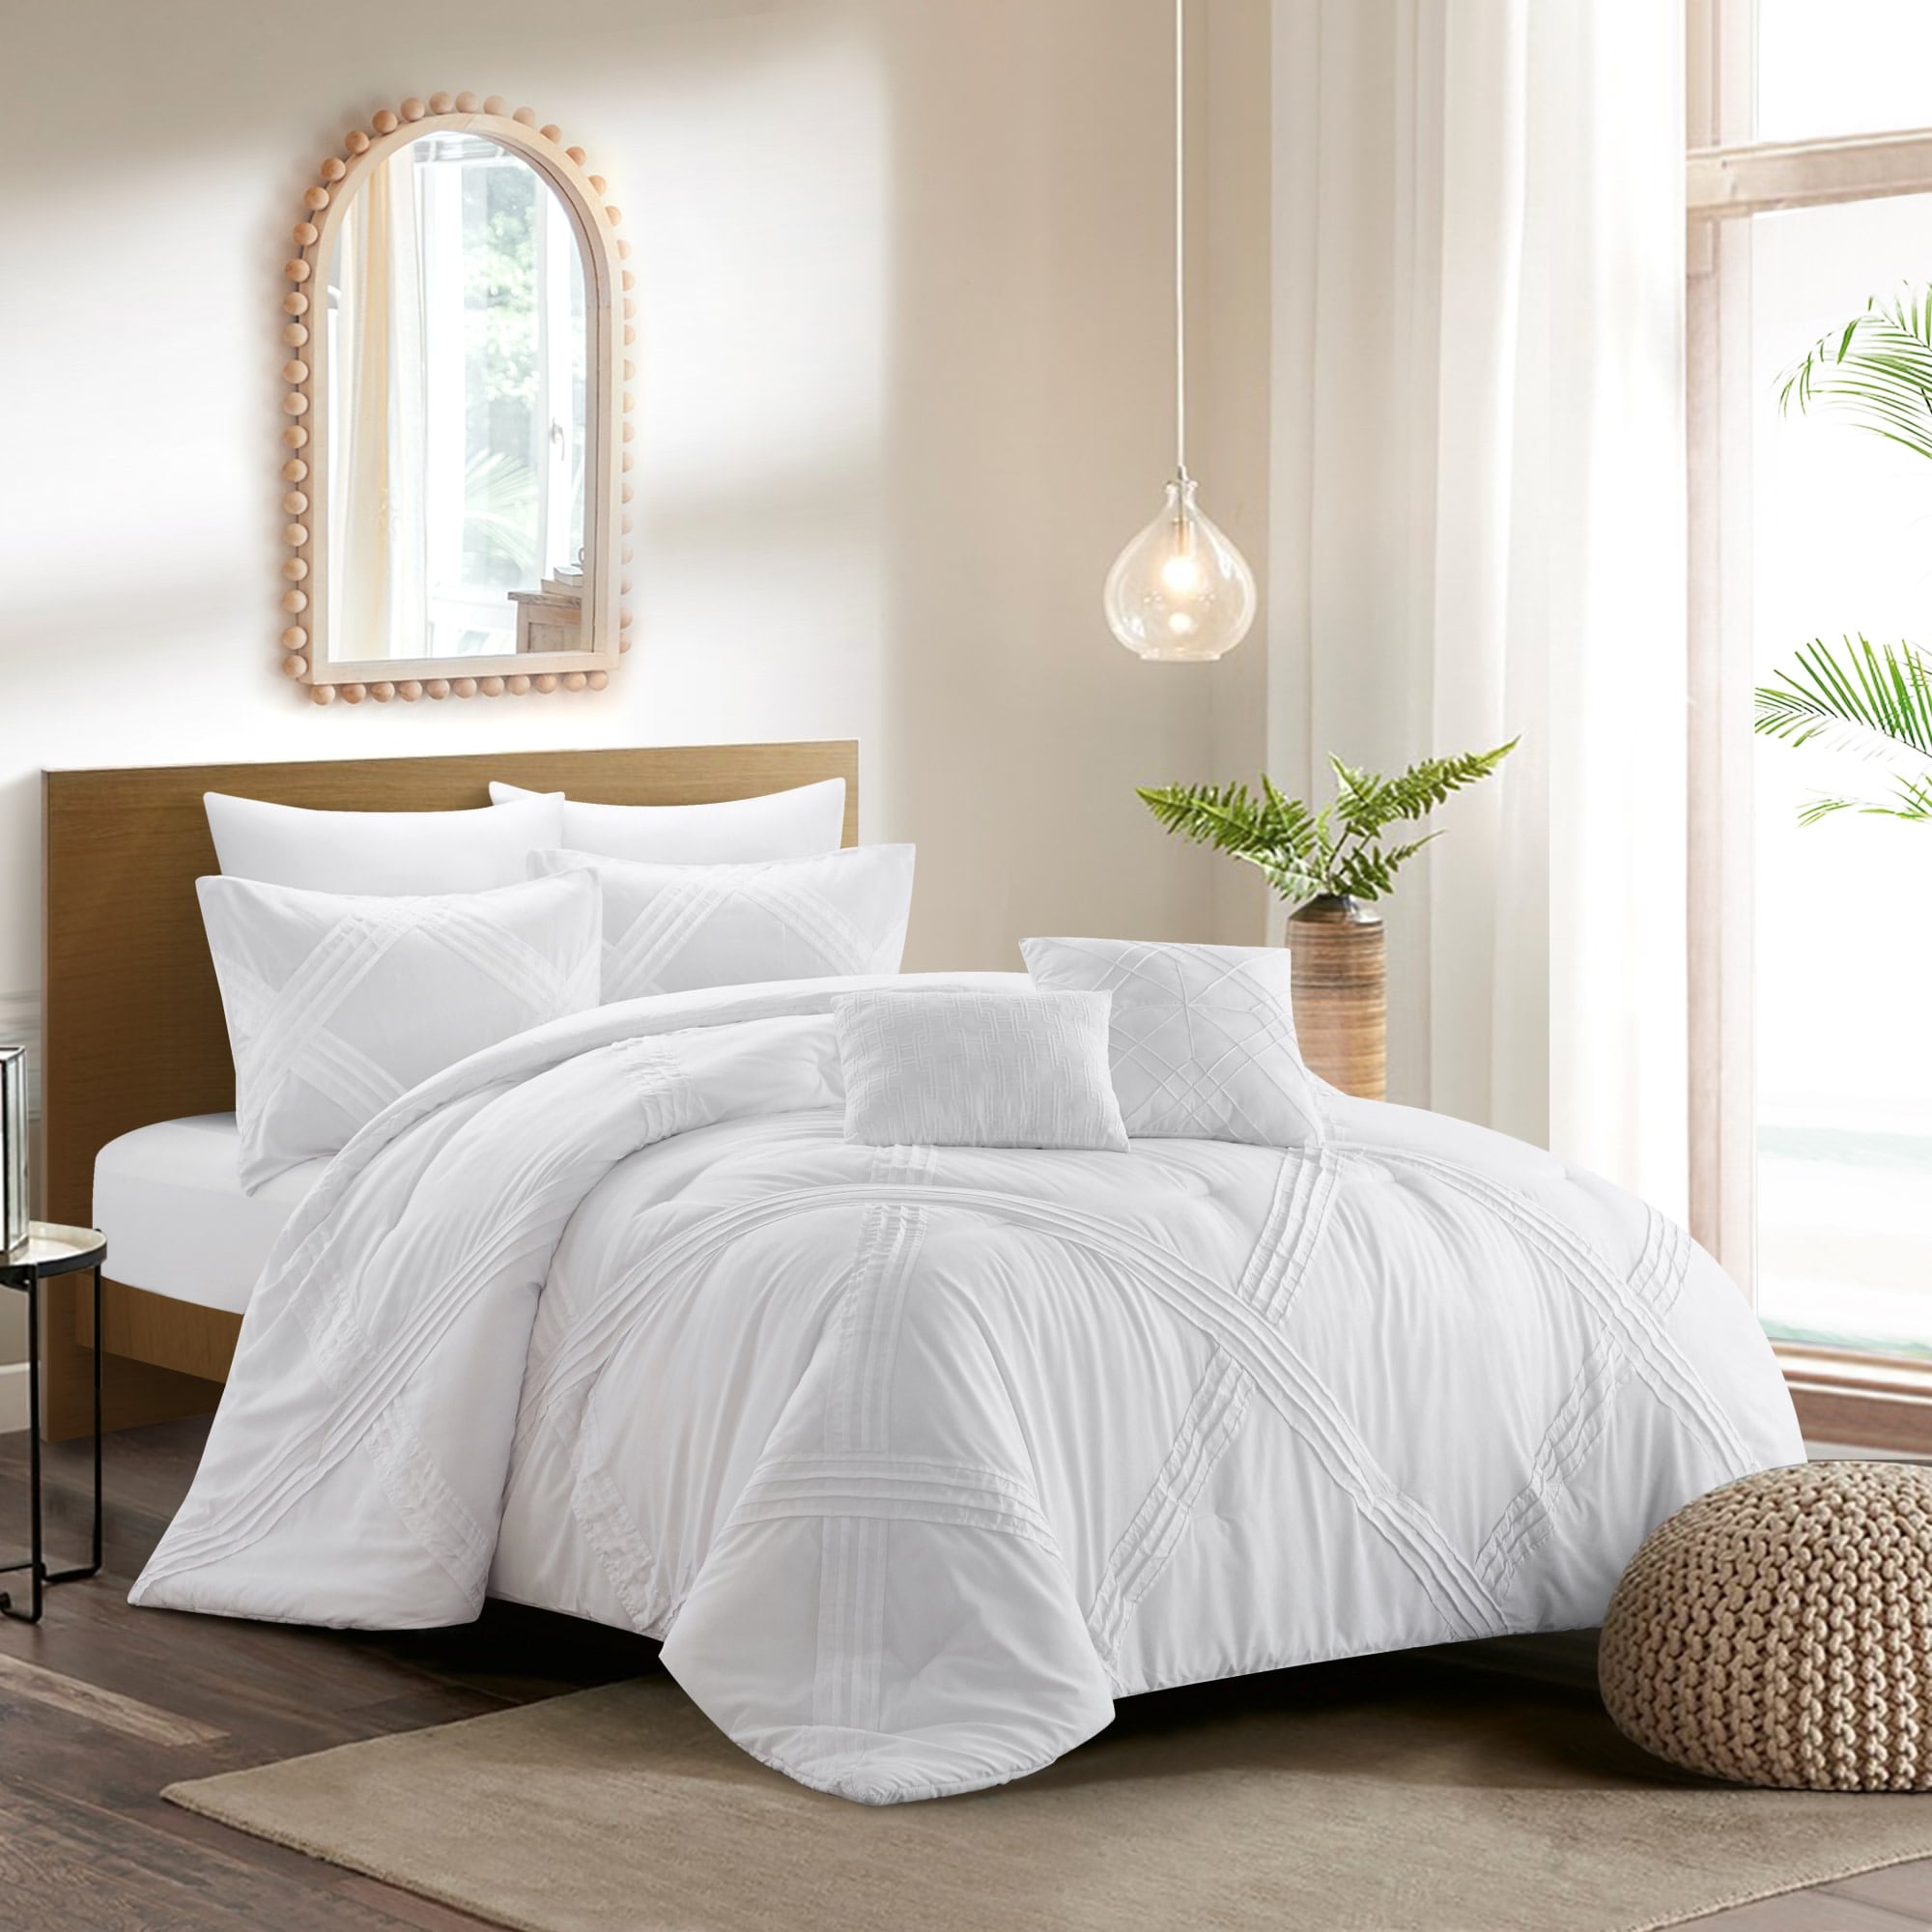 Bedding Round-Up and My Favorite Bedding Pieces- King, Queen, and Full -  Nesting With Grace